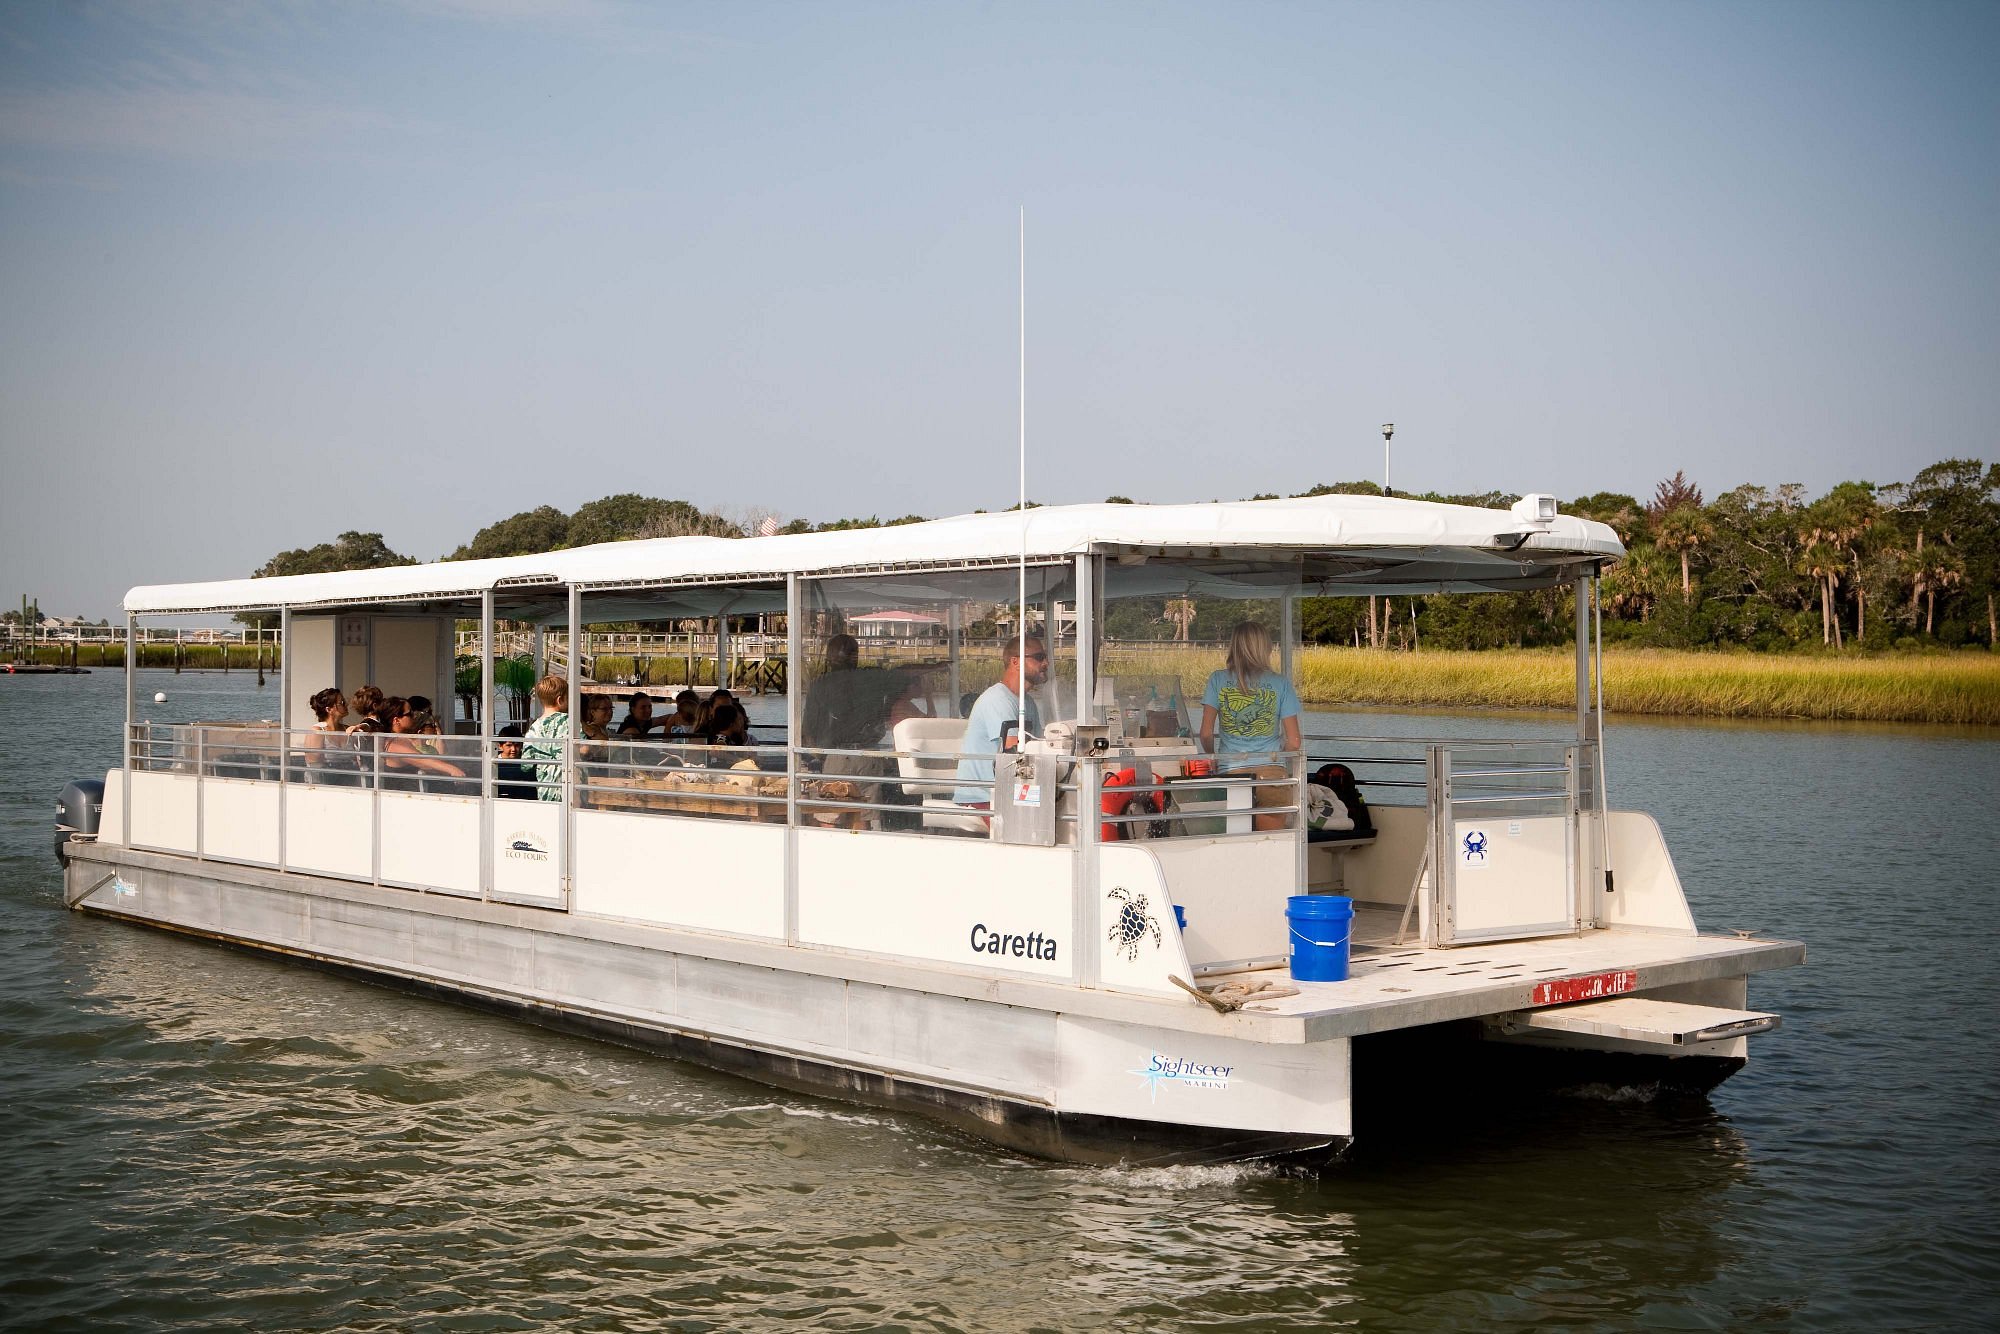 Private Boat for Large Groups in Isle of Palms